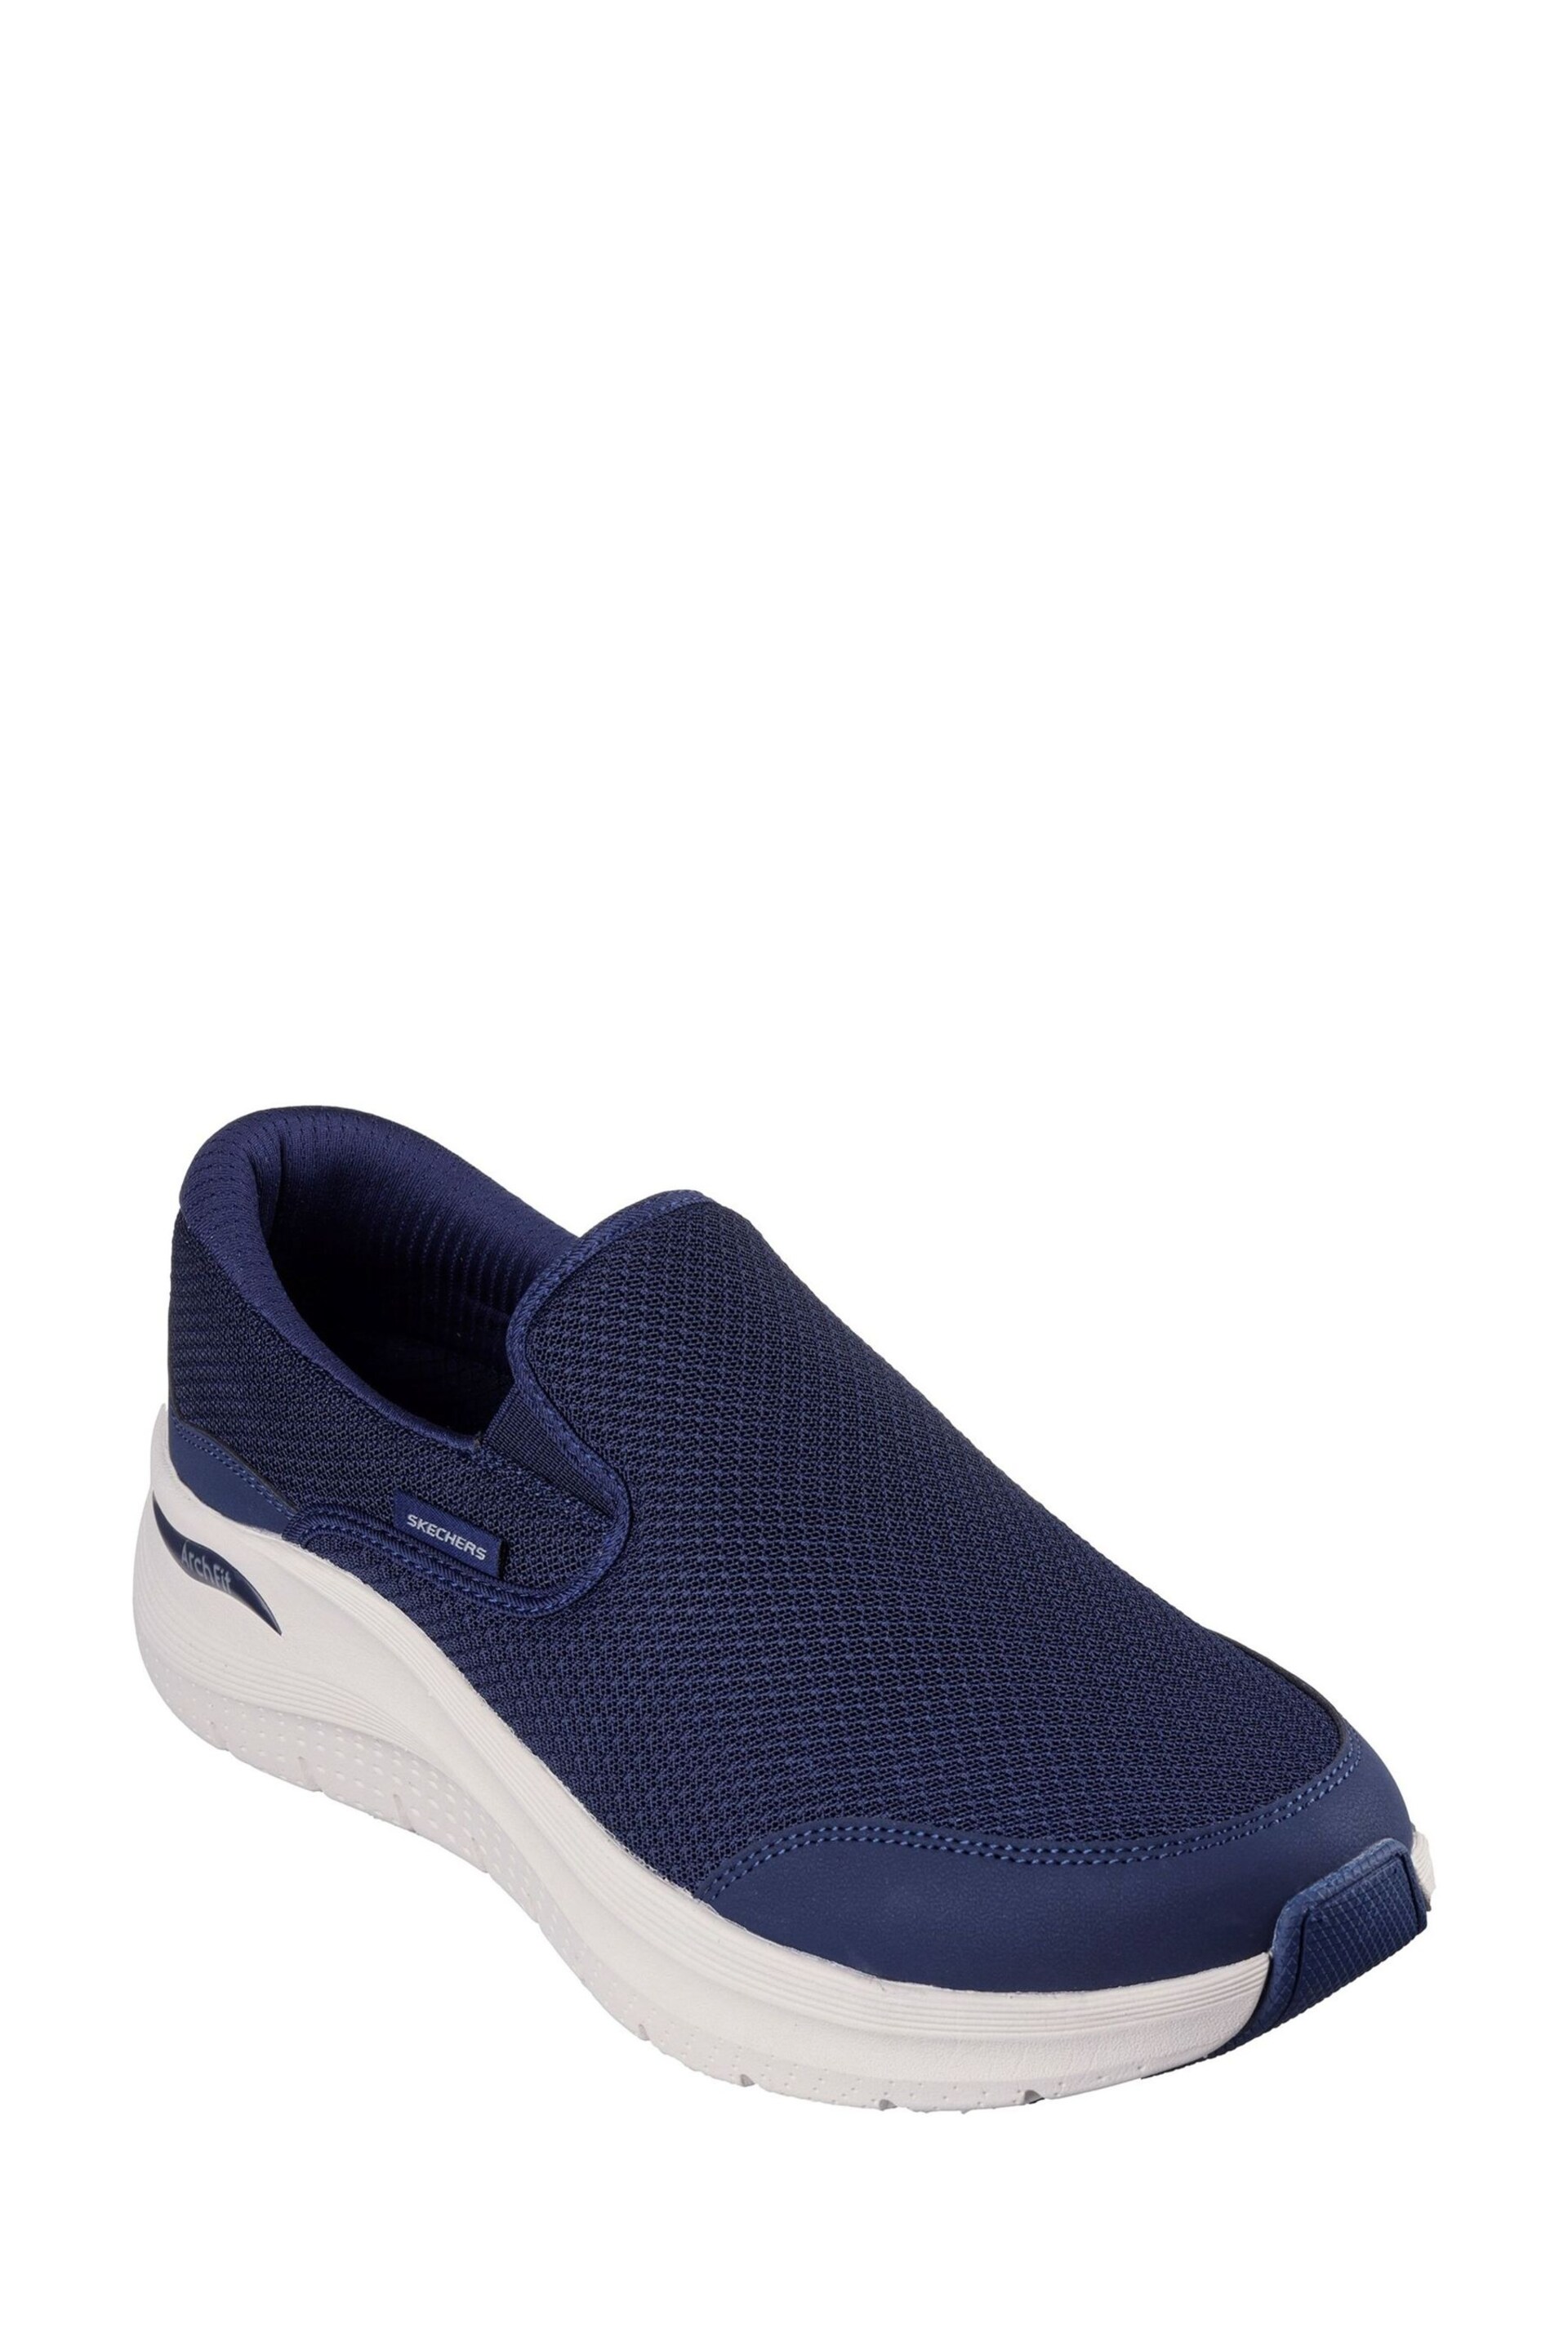 Skechers Blue Arch Fit 2.0 Vallo Trainers - Image 2 of 3